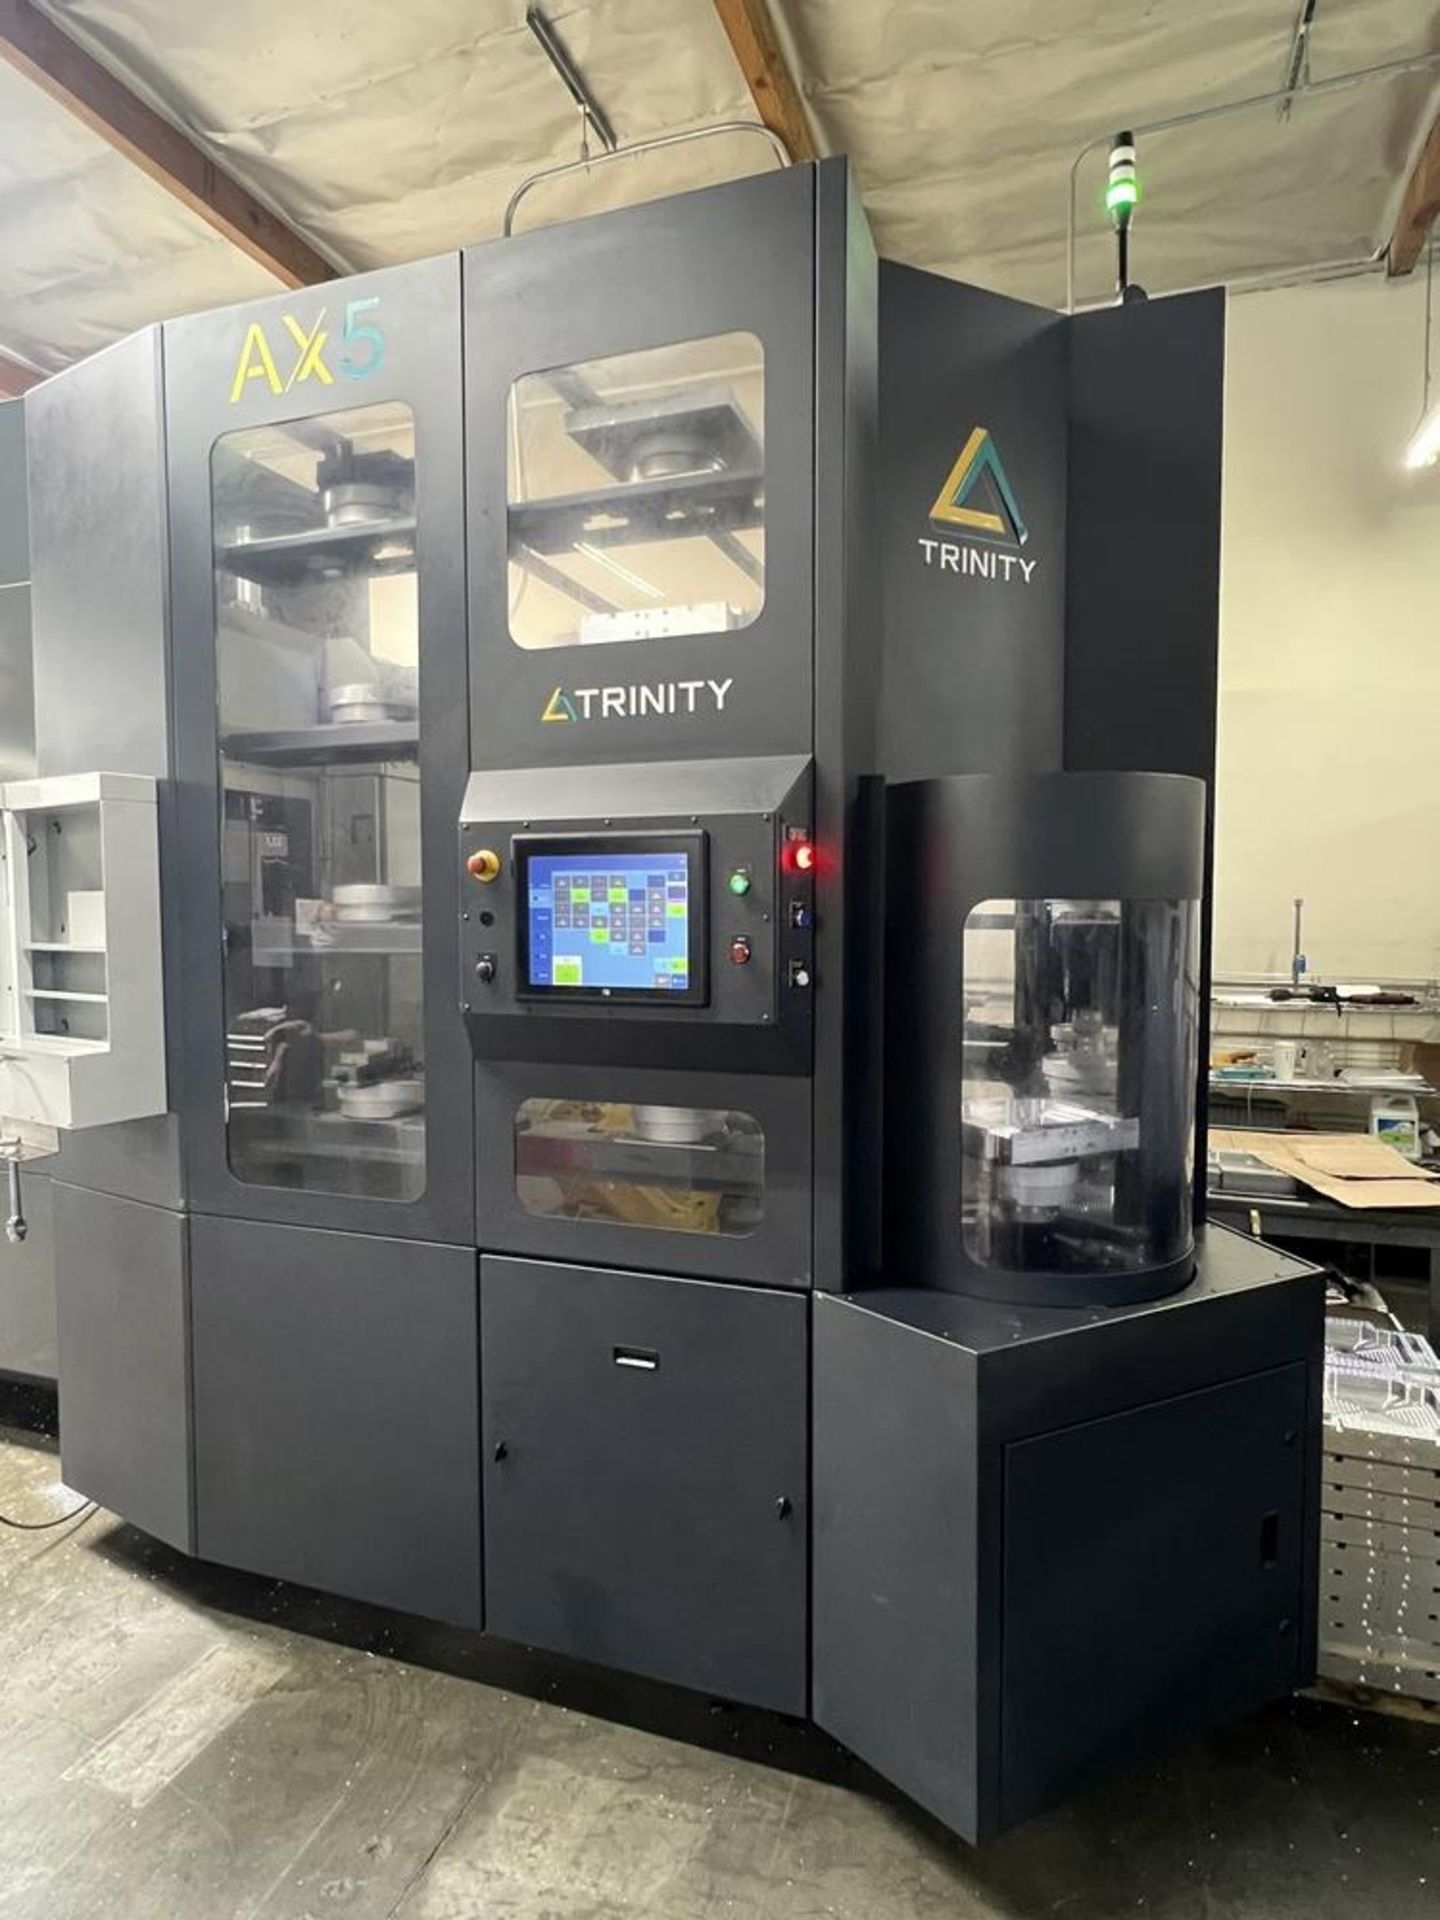 2019 Haas UMC 750 Vertical Machining Center, With Trinity Robot F 242379 AX5 Fanuc Robot Pallet - Image 4 of 34